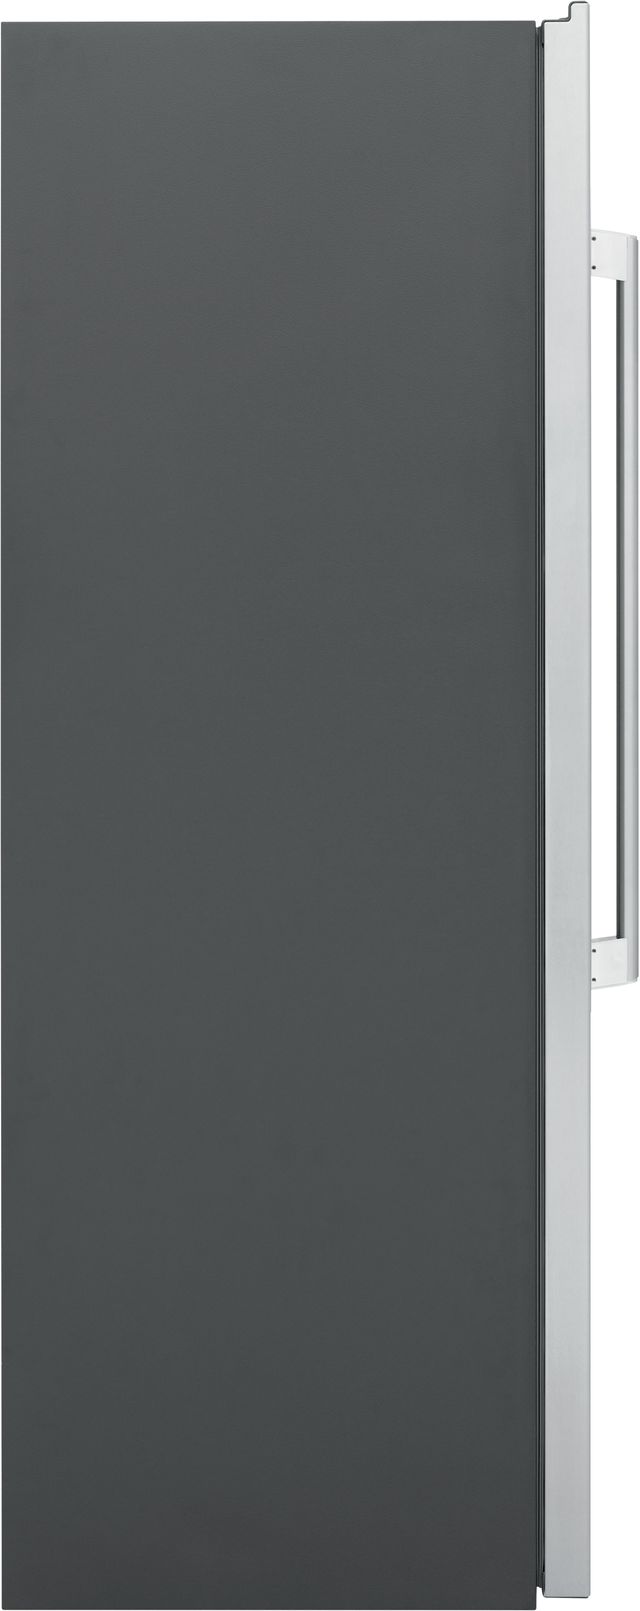 Electrolux 18.6 Cu. Ft. Stainless Steel Column Refrigerator 4